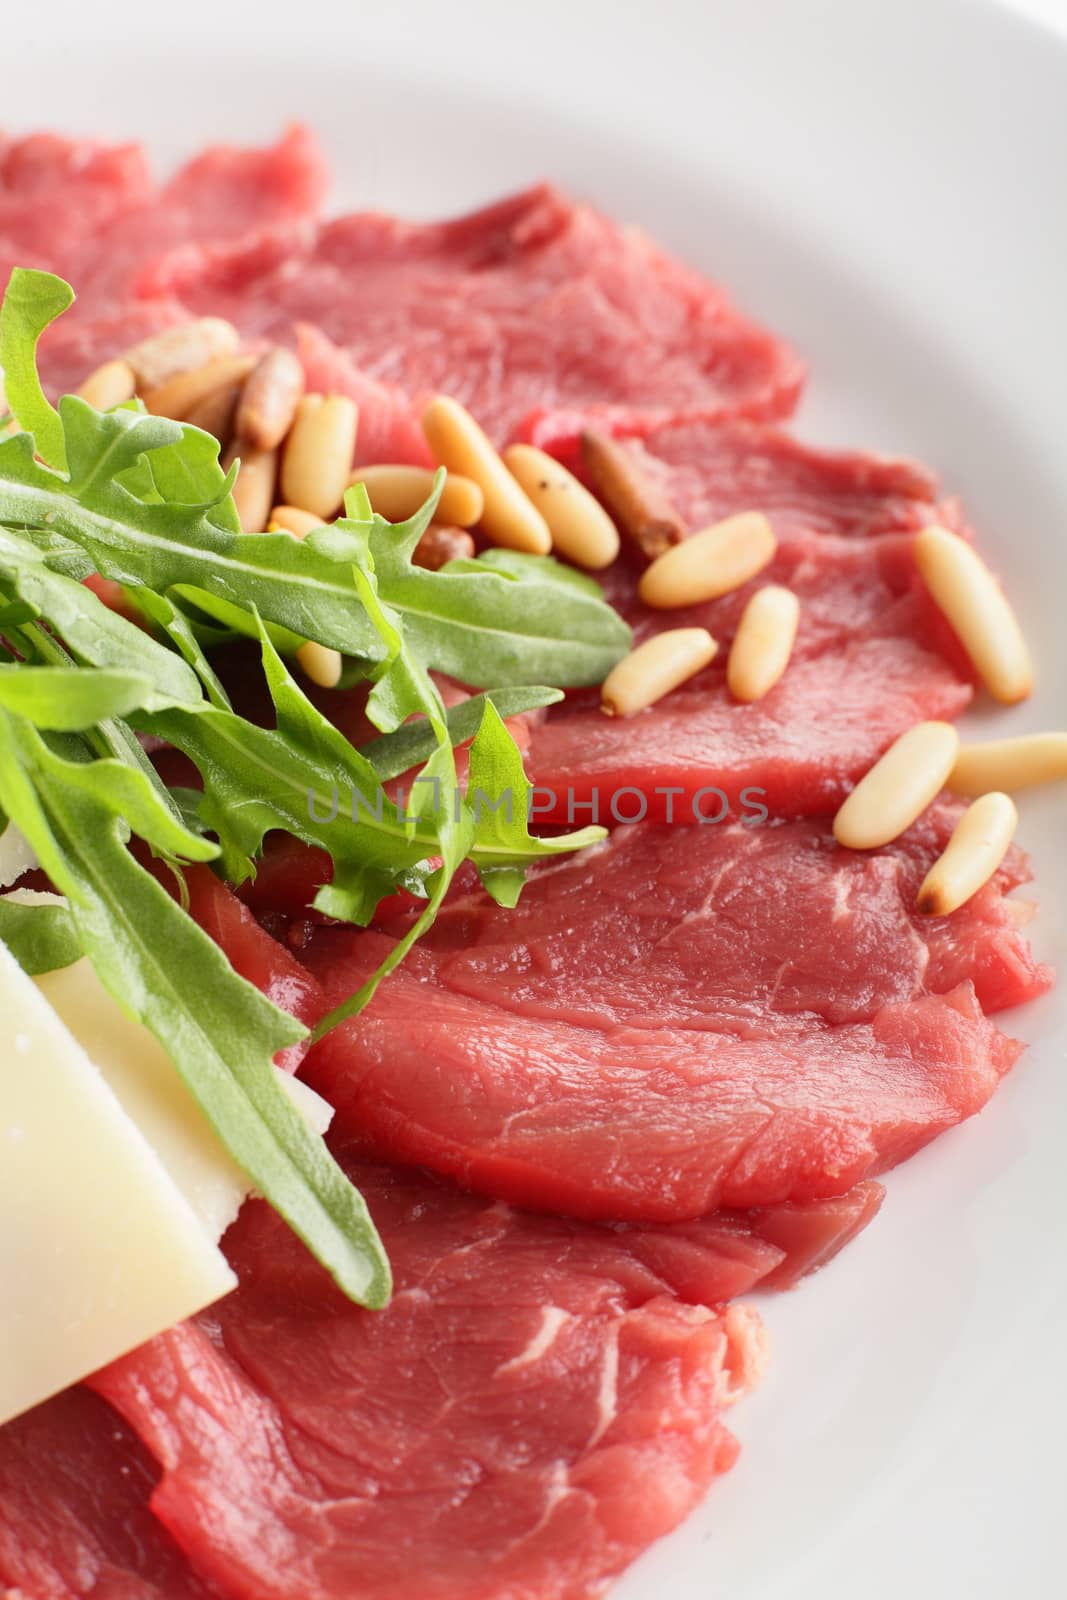 peaces of meat with garnish by fiphoto